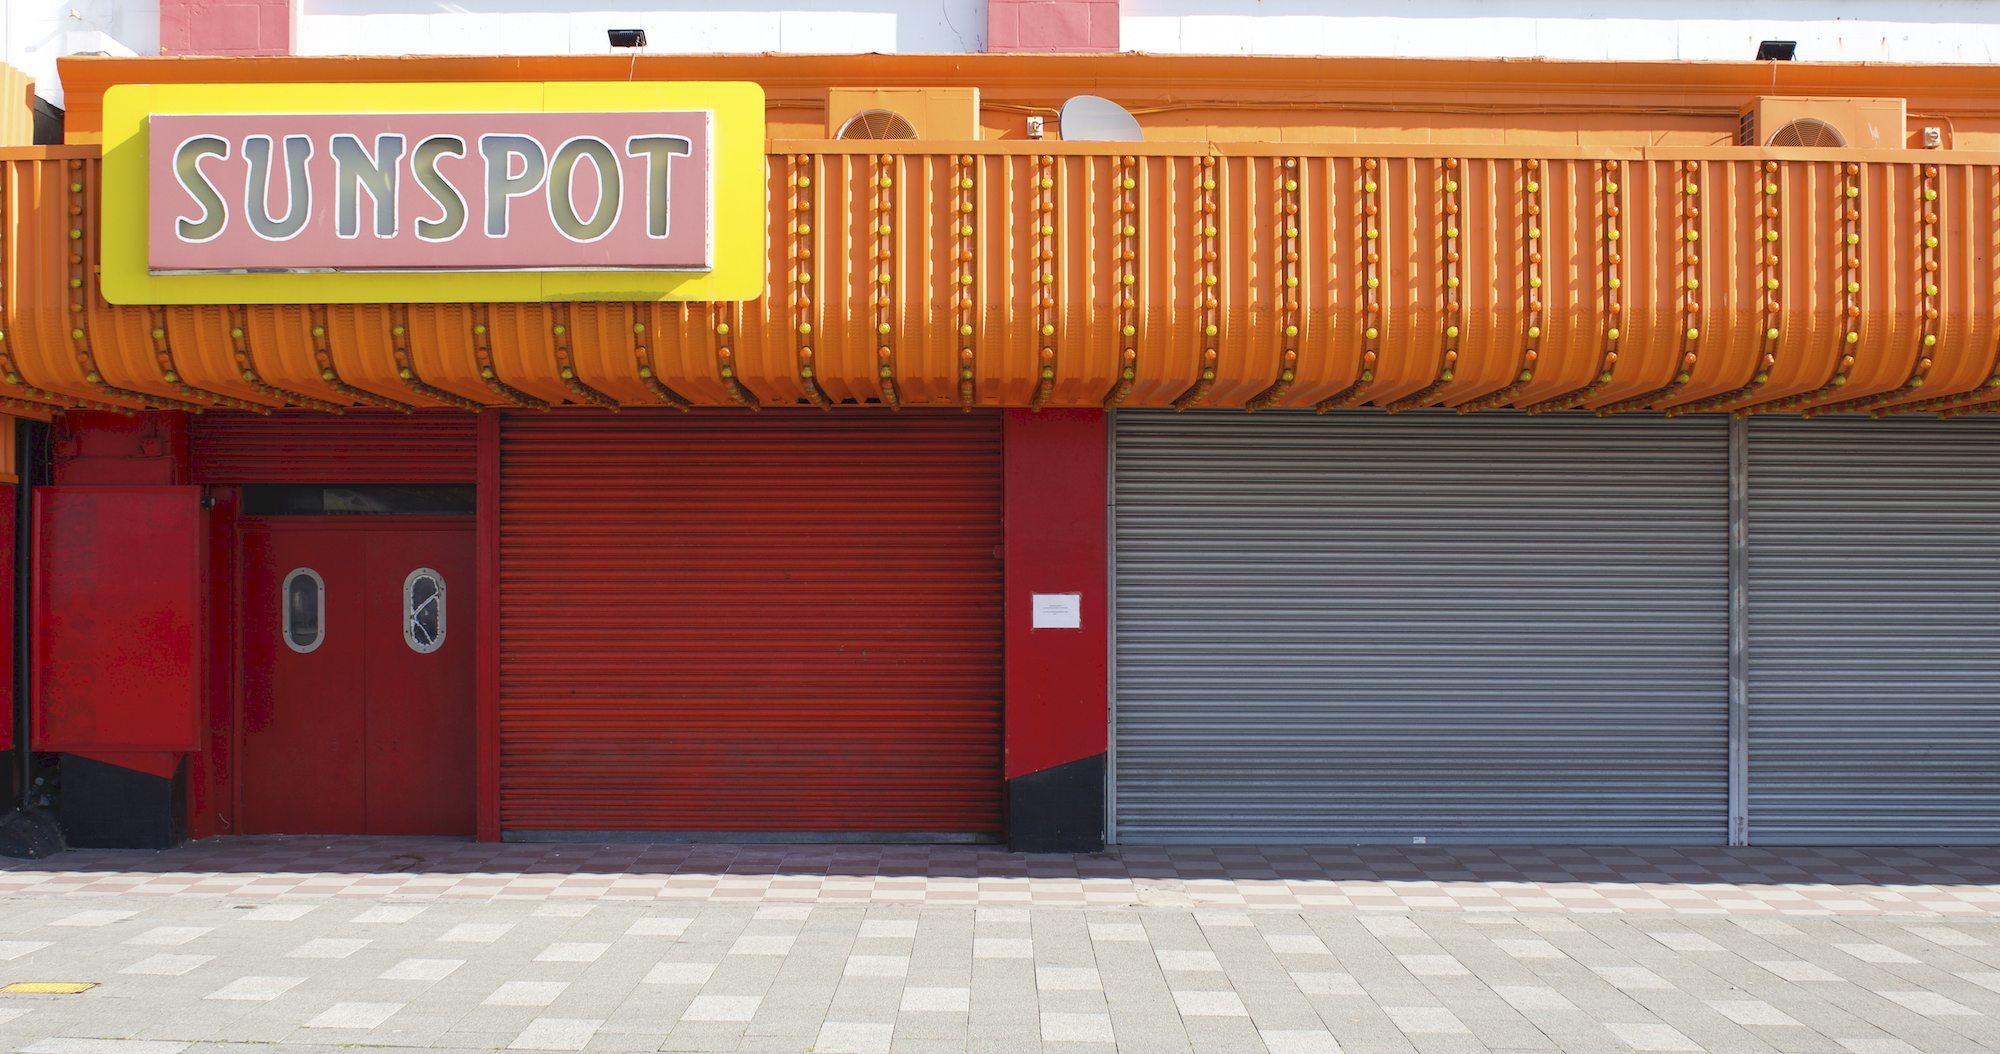 A large store front with corrugated orange facade and red shutters is closed. The shop is called 'sunspot; these words are signposted in pink and yellow. It is a warm sunny day.